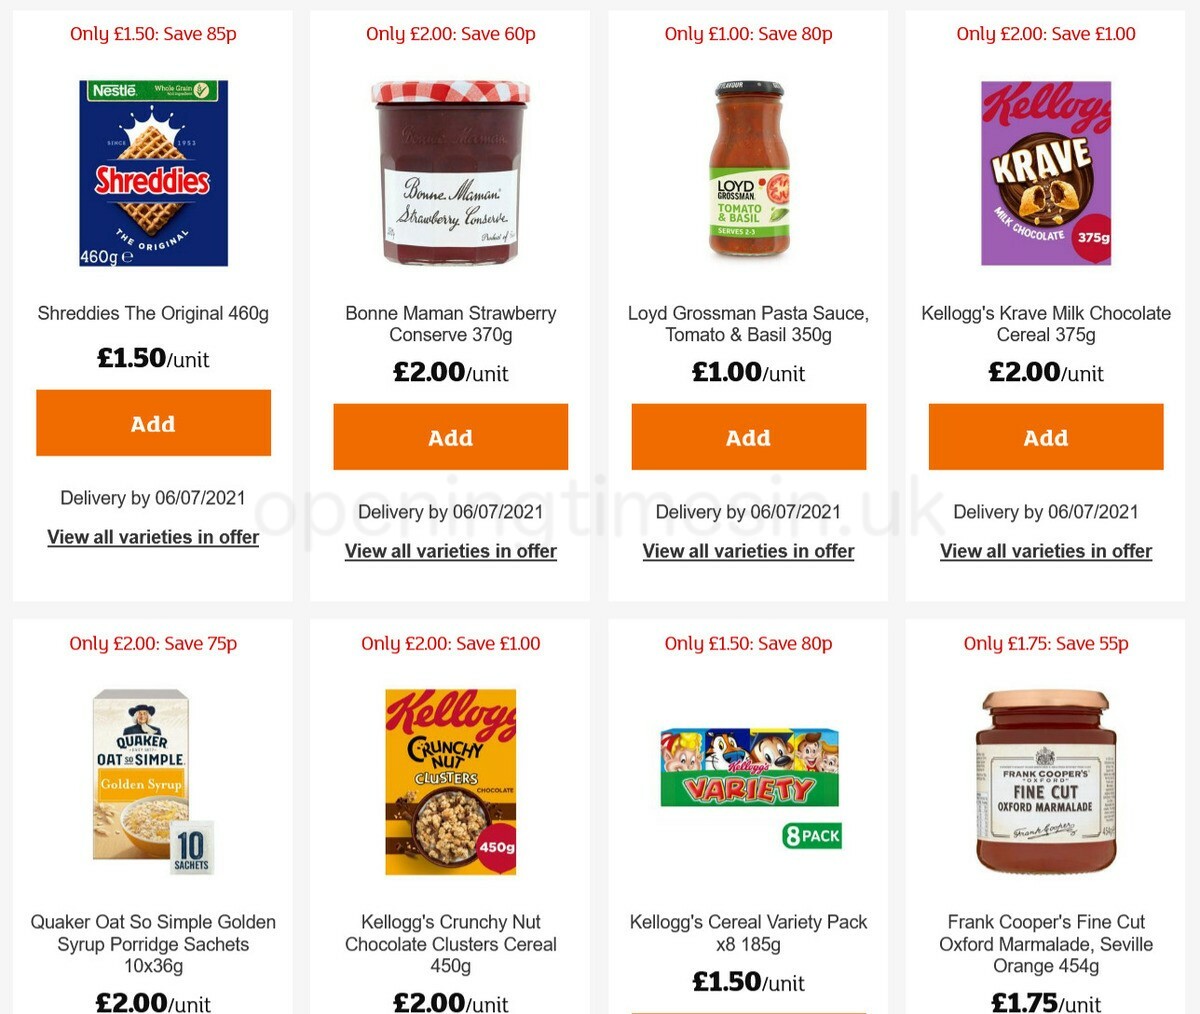 Sainsbury's Offers from 17 June